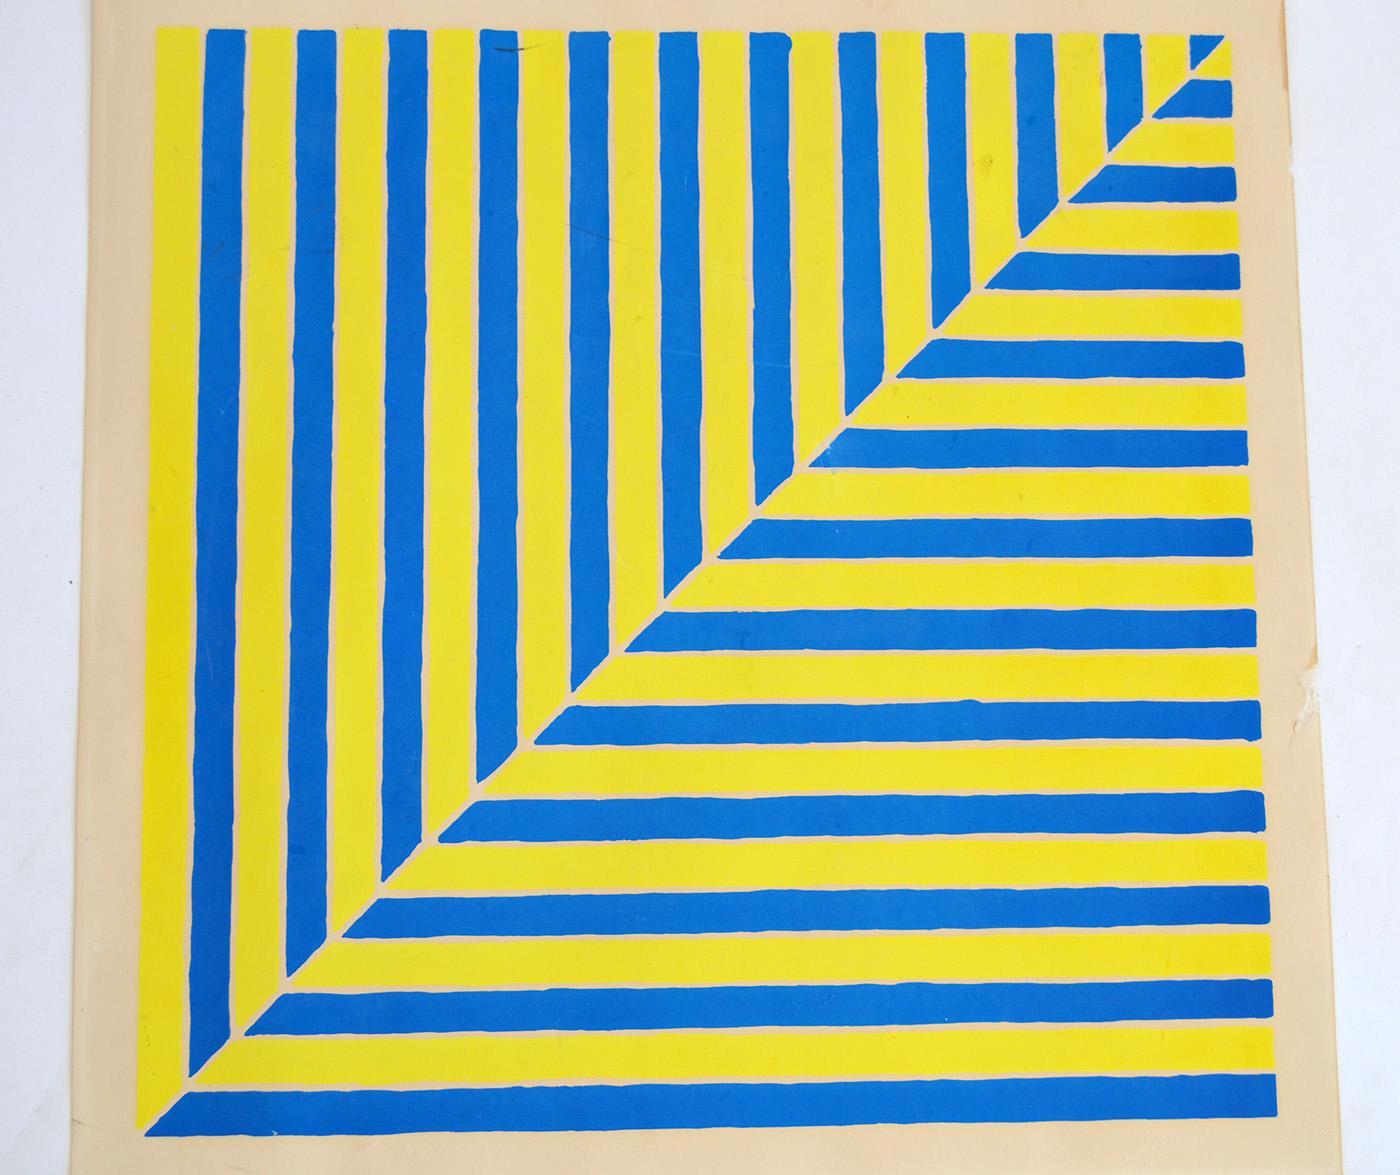 Frank Stella (1936-2024) “Rabat” Abstract Screenprint Unframed Edition of 500

Frank Stella’s “Rabat” Screenprint (1964) is a mid century abstract geometric composition. Created on wove paper with blindprint, this piece - from an edition of 500 - is